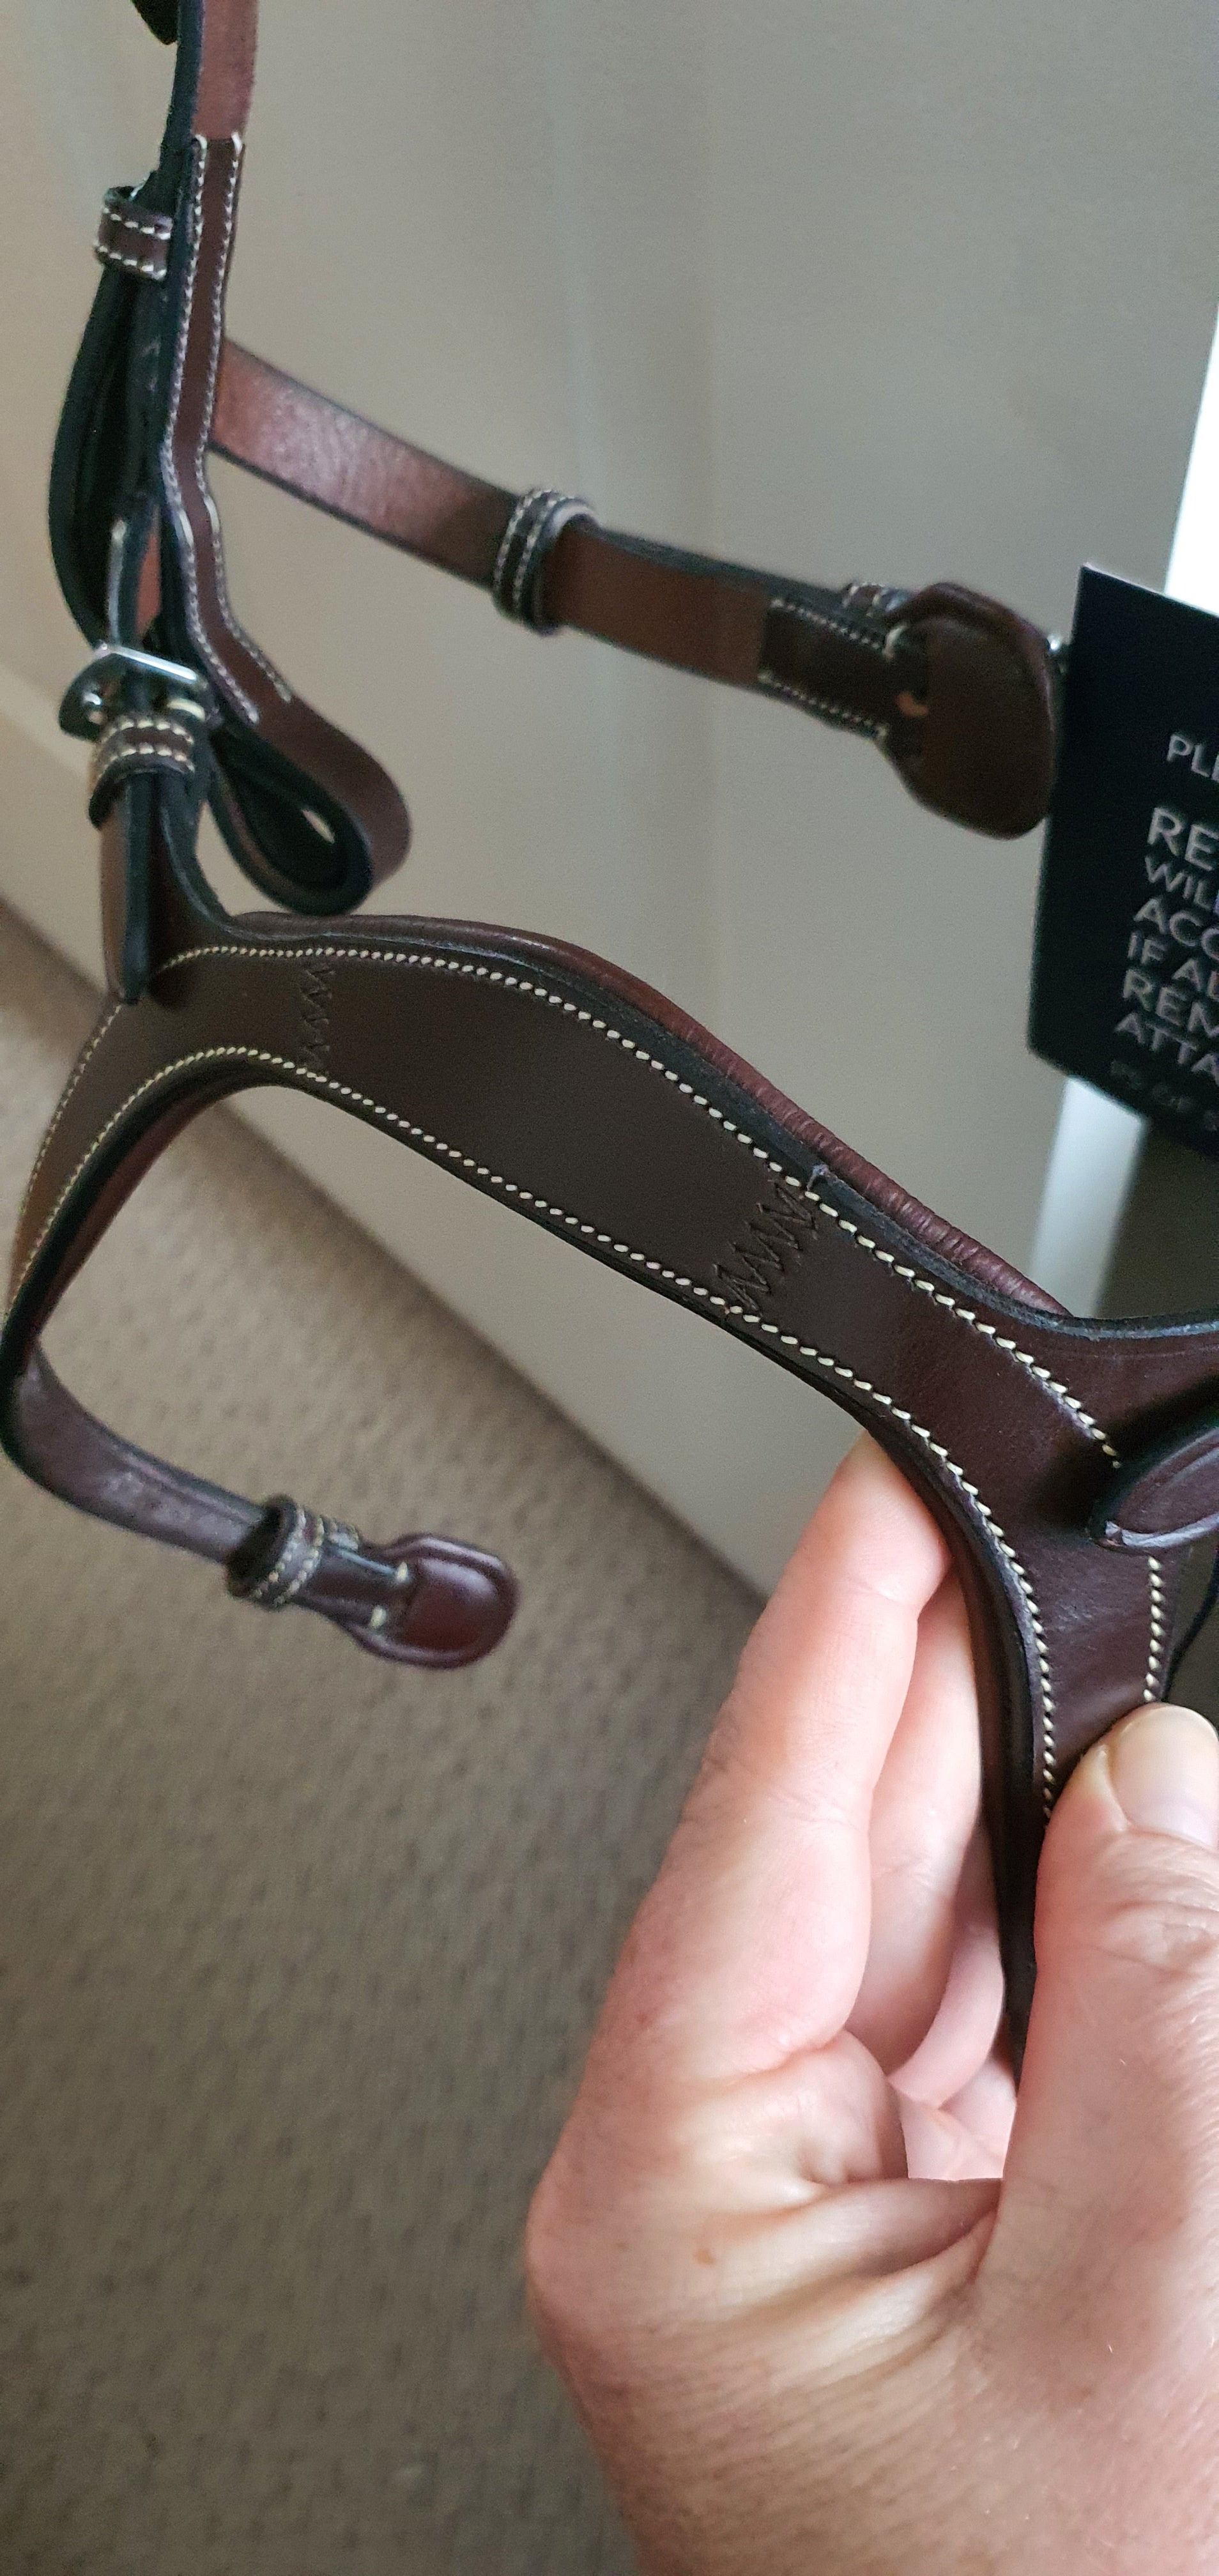 PS of Sweden brown Nirak bridle full size (size 2) Brand new! - Robyn's Tack Room 